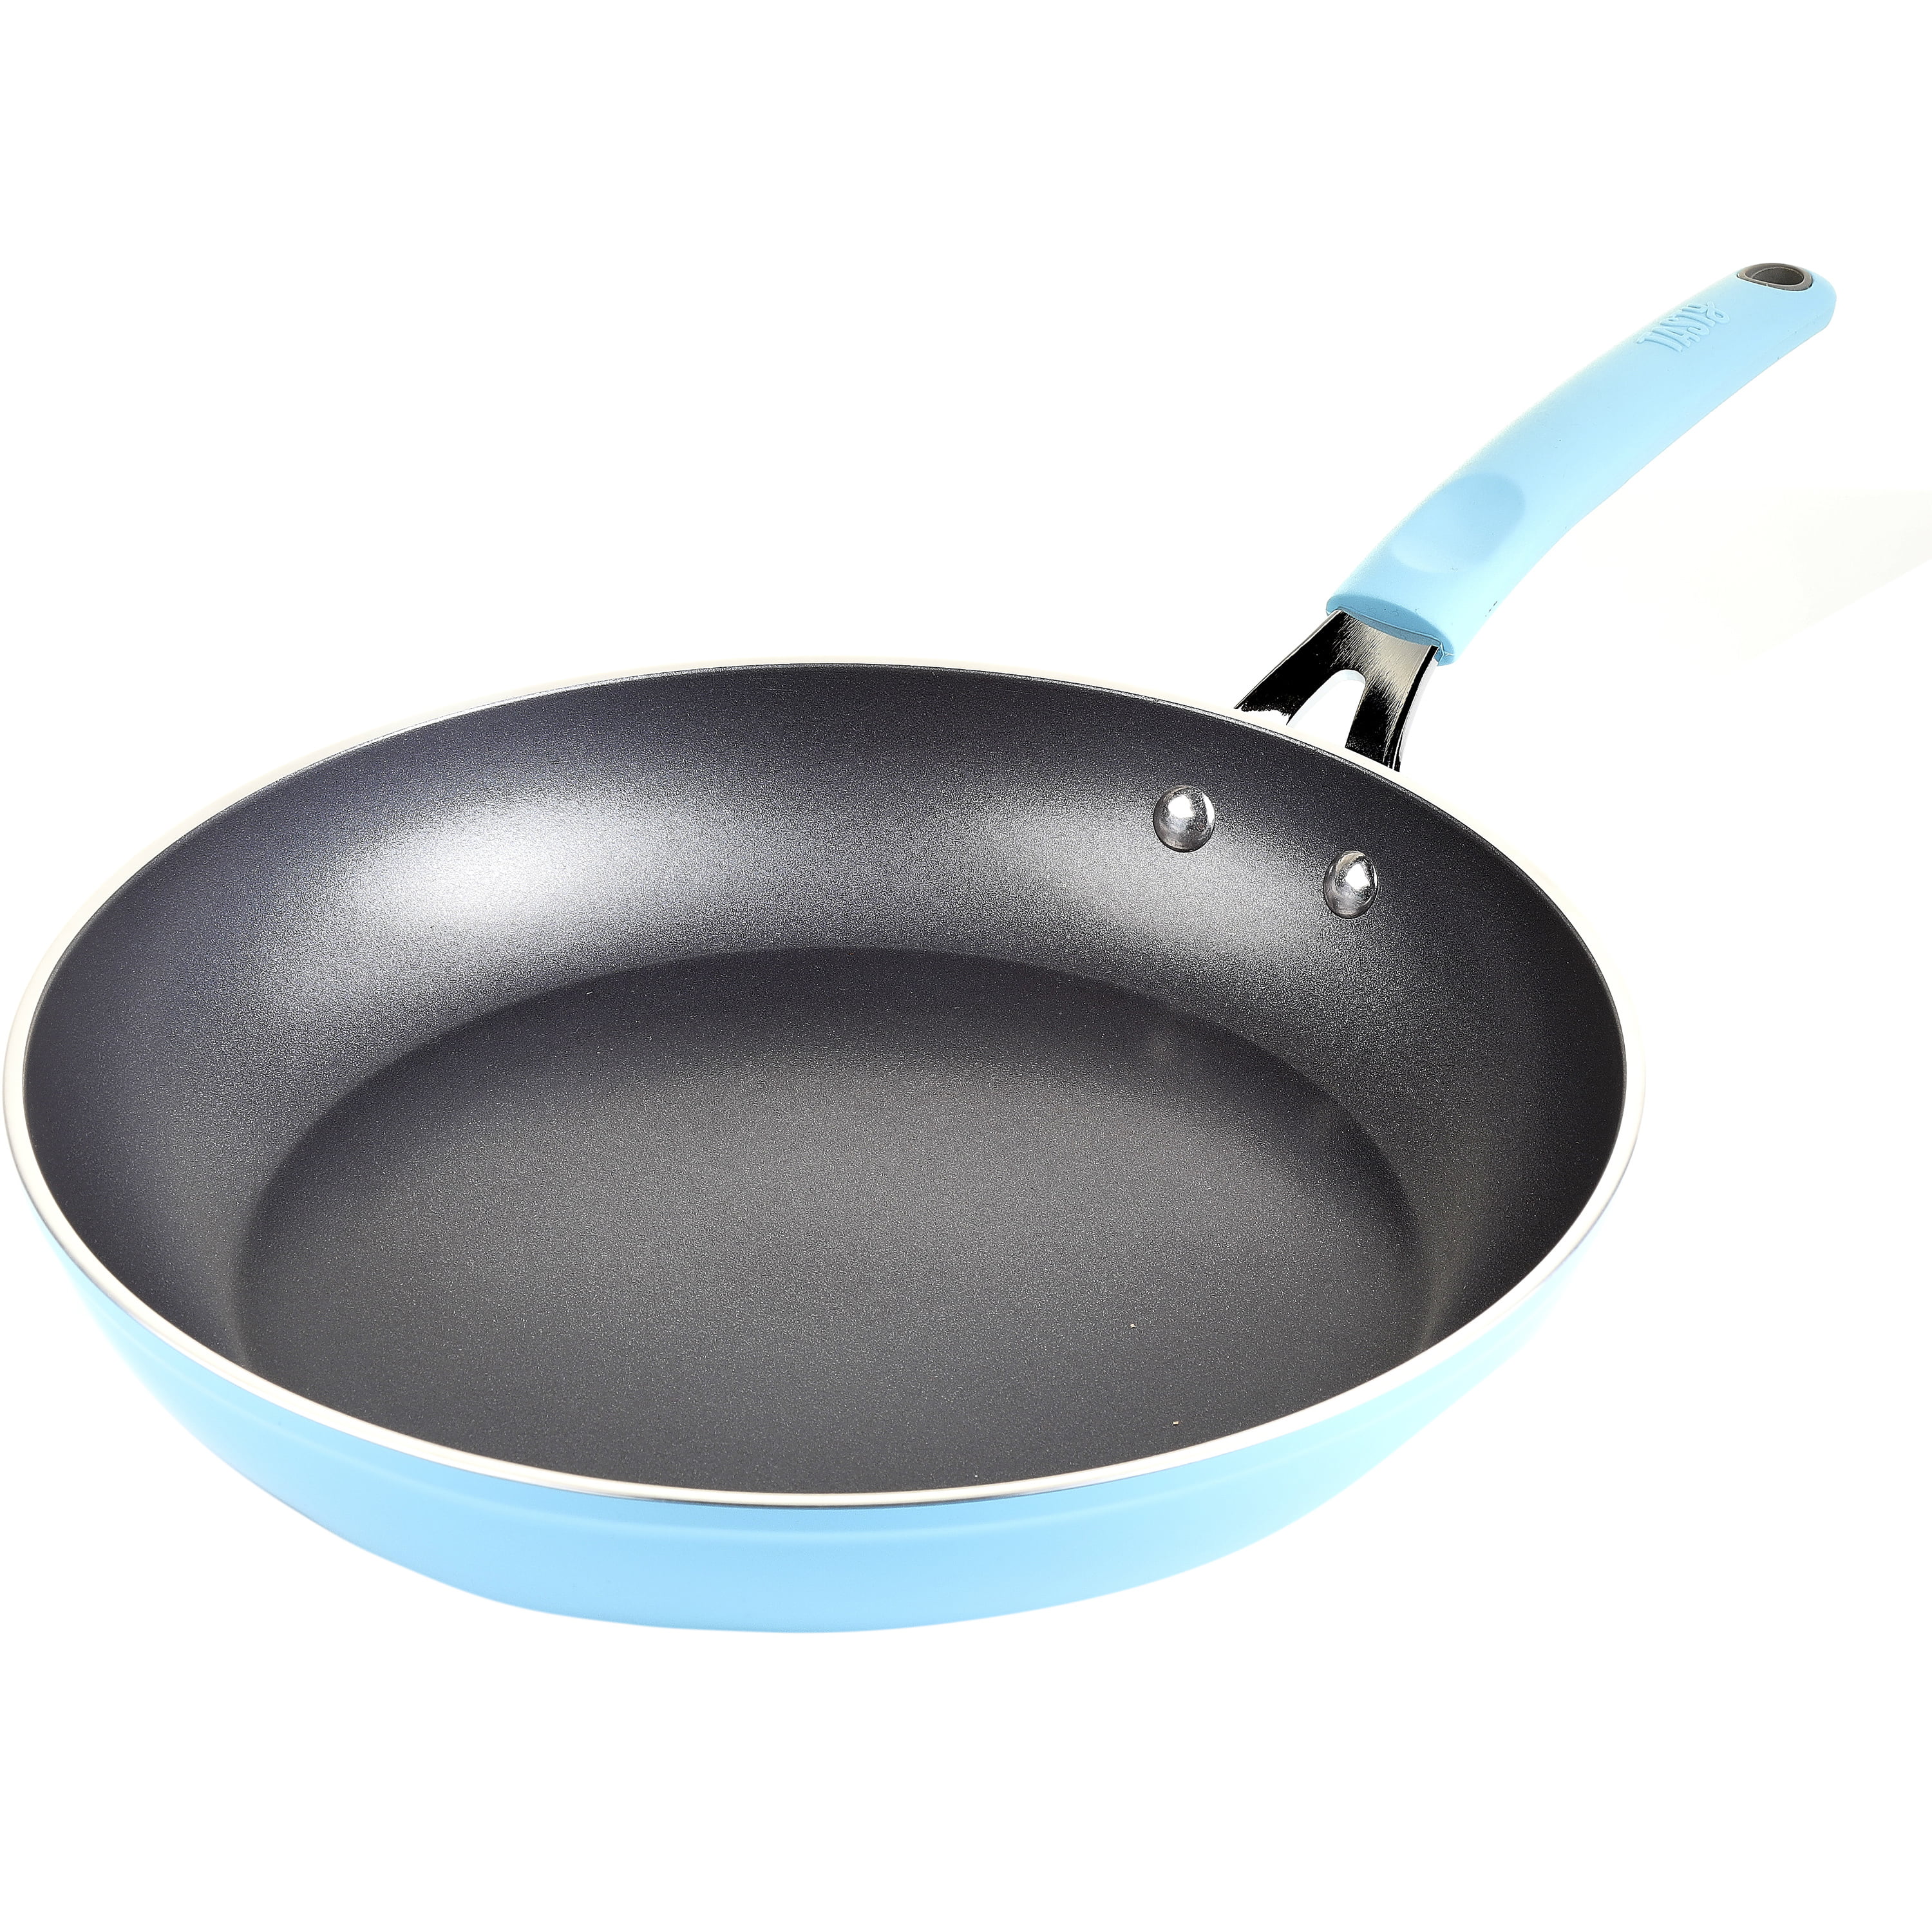 11 Nonstick Frying Pan with Lid - 11 inch Nonstick Skillets with USA Blue Gradient Granite Derived Coating, Heat-resisted Silicon Handle, PFOA